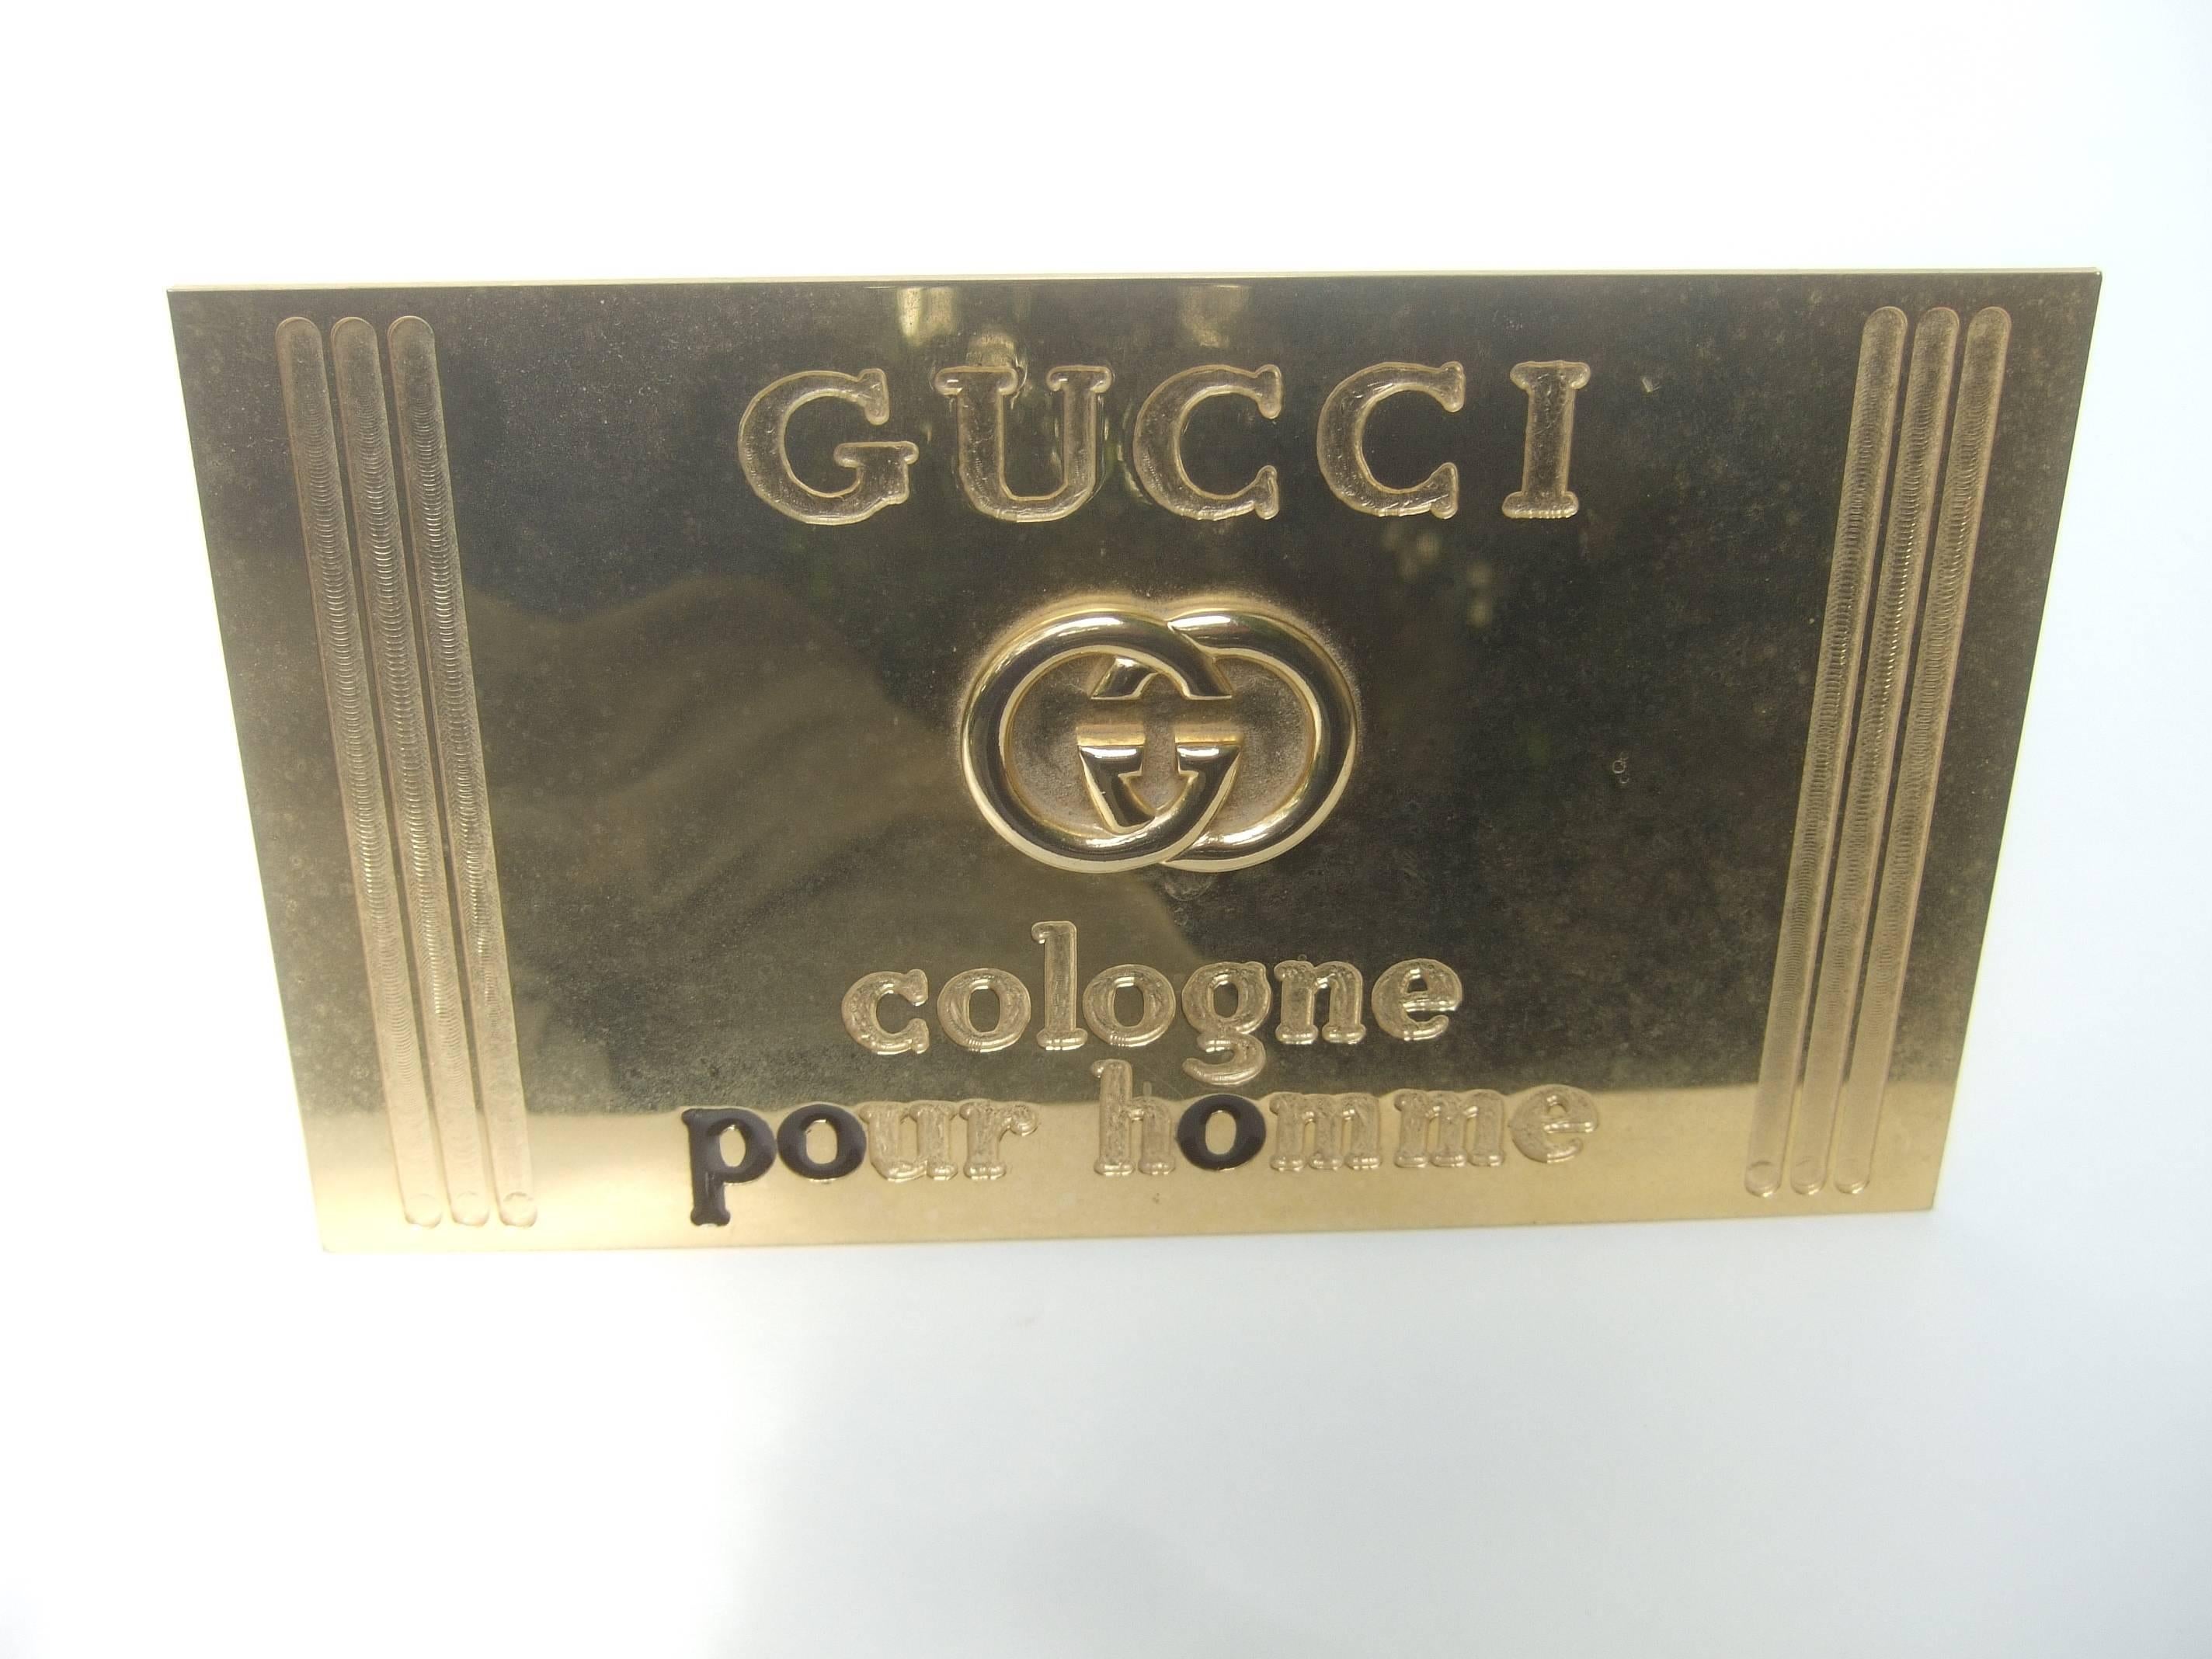 Gucci Italy Brass metal display sign c 1980s
The sleek brass metal sign was a display 
fixture at a Gucci Boutique retail store from
the men's fragrance department 

The sign is inscribed: Gucci cologne pour homme

The rare Gucci sign makes a